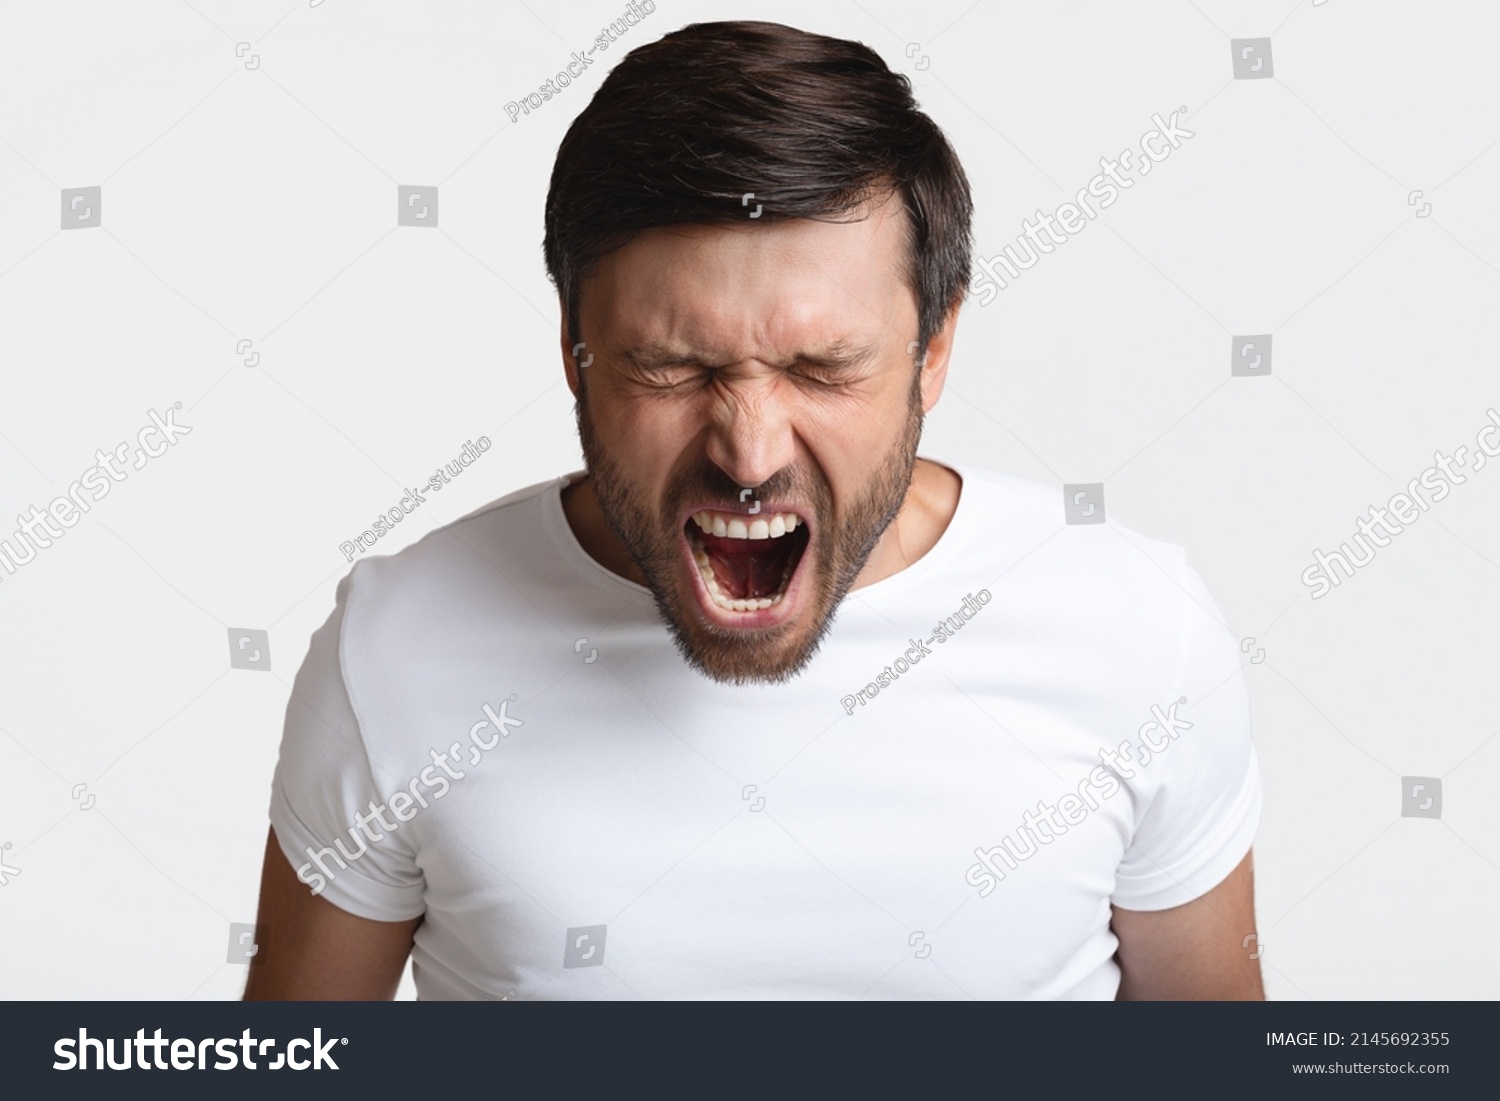 Anger. Mad Male Shouting Loudly In Anger With Eyes Closed Expressing Fury Posing Standing On White Background. Rage, Negative Emotions Concept. Studio Shot #2145692355